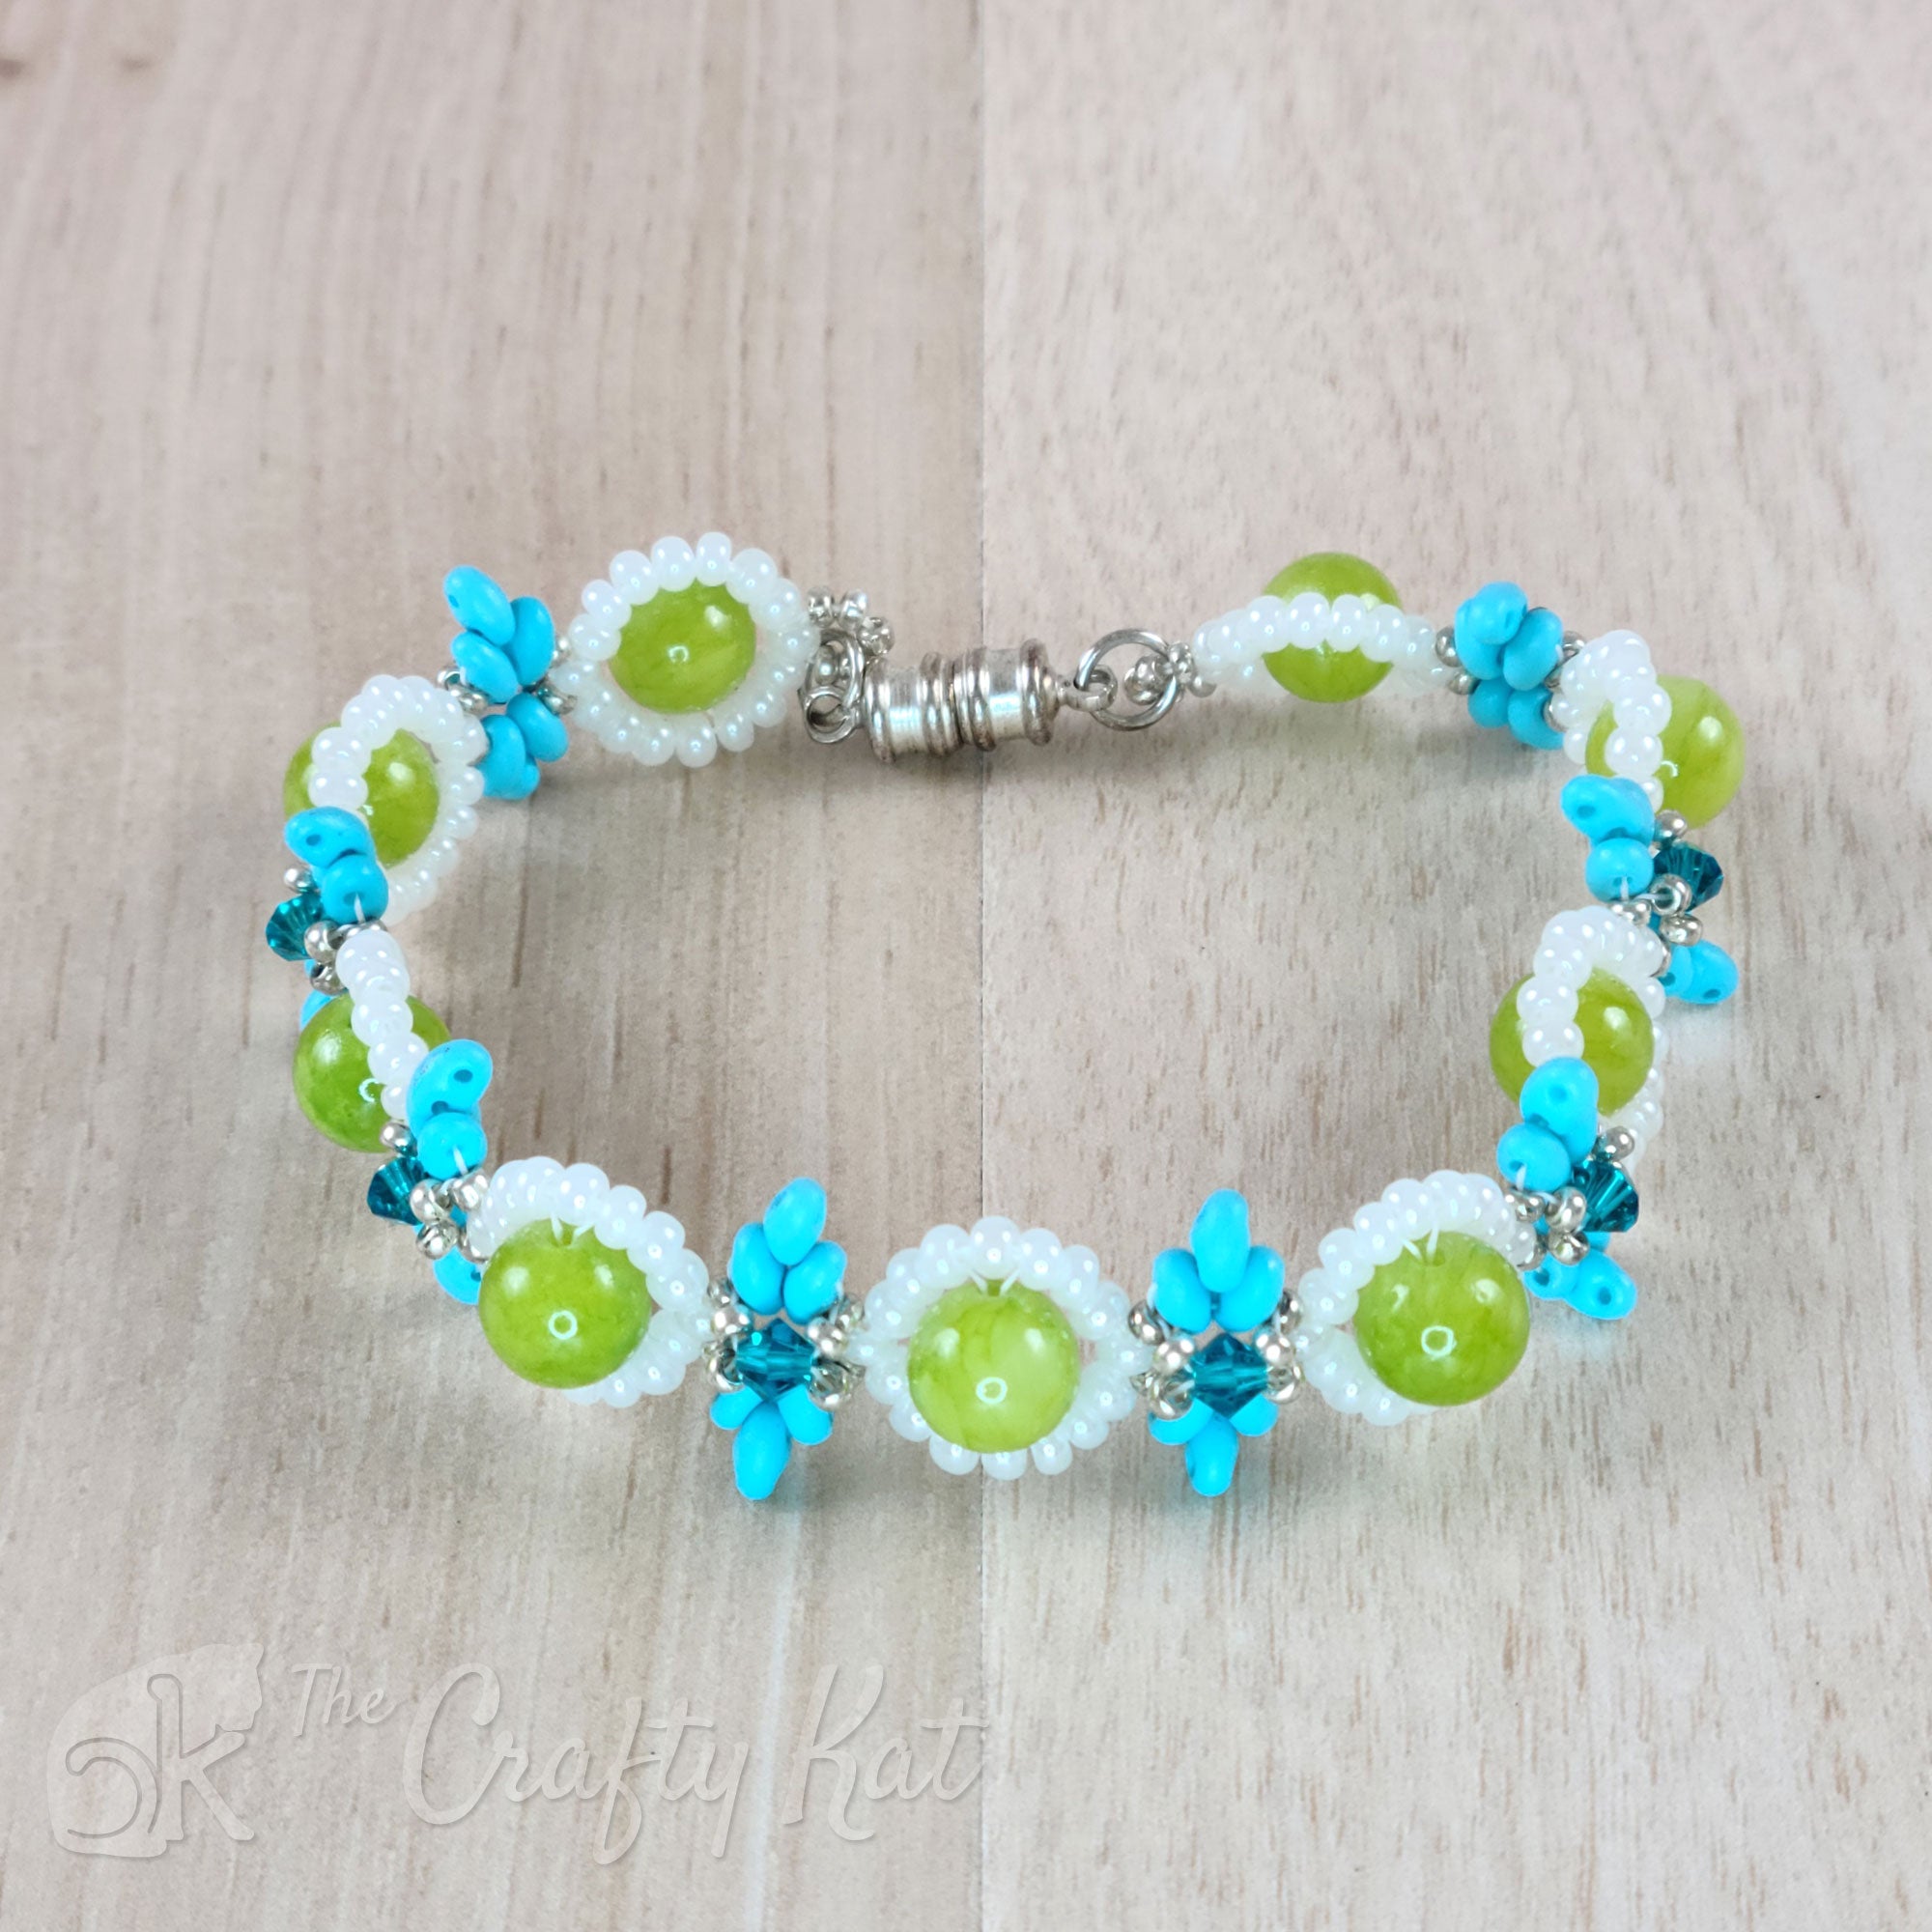 Daisy Chain Bracelet - made in Yorkshire